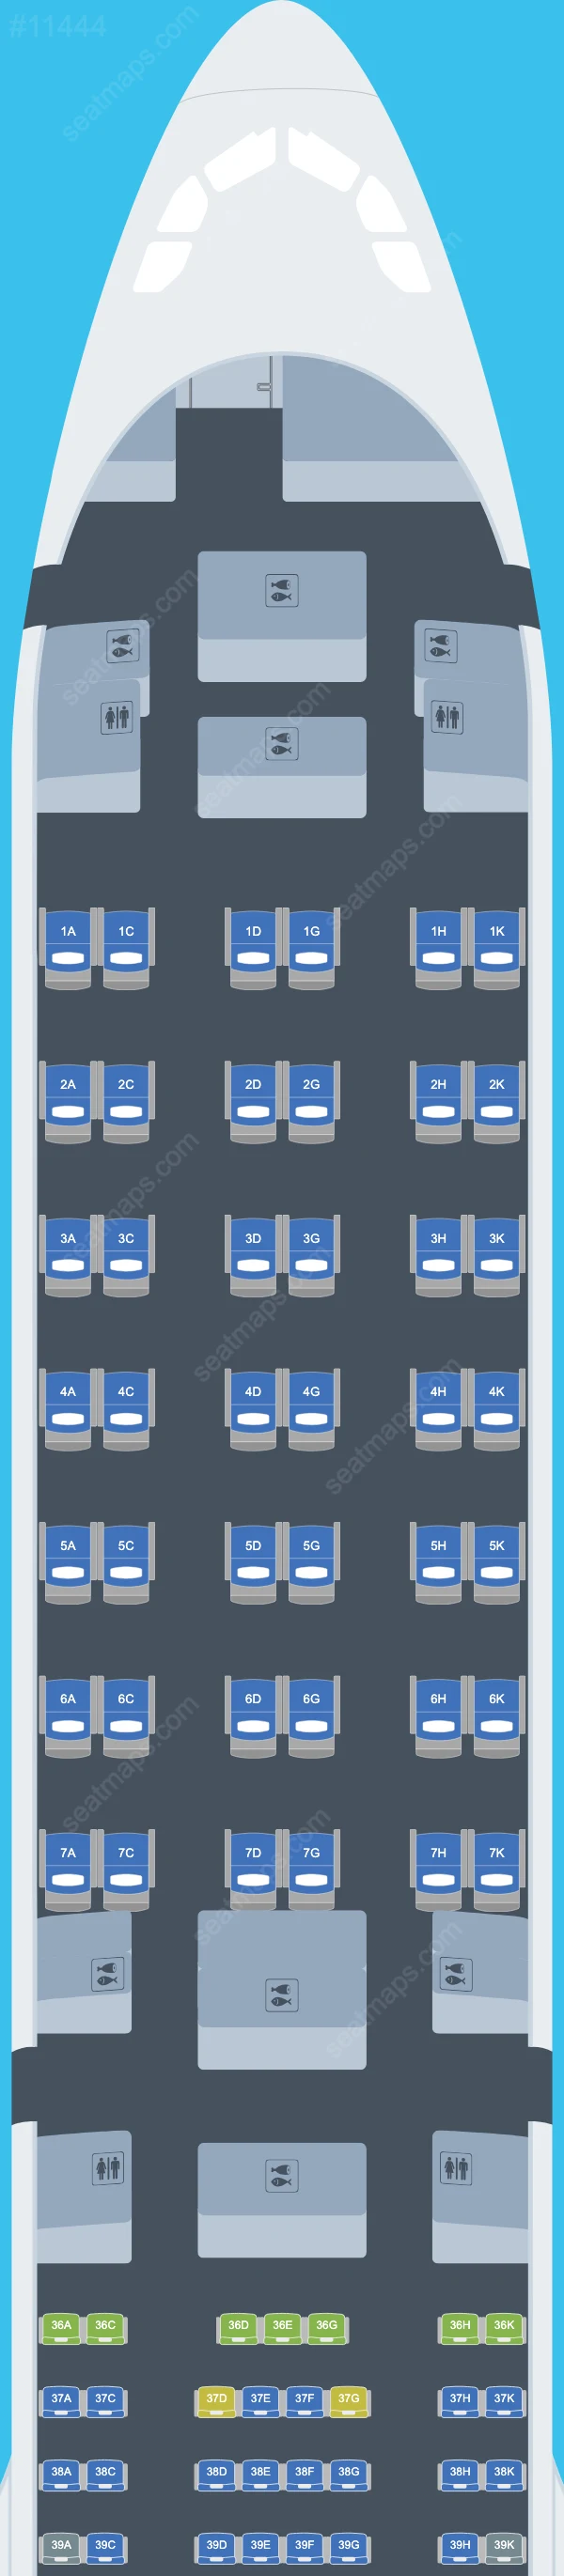 USC Airbus A340 aircraft seat map  A340-600